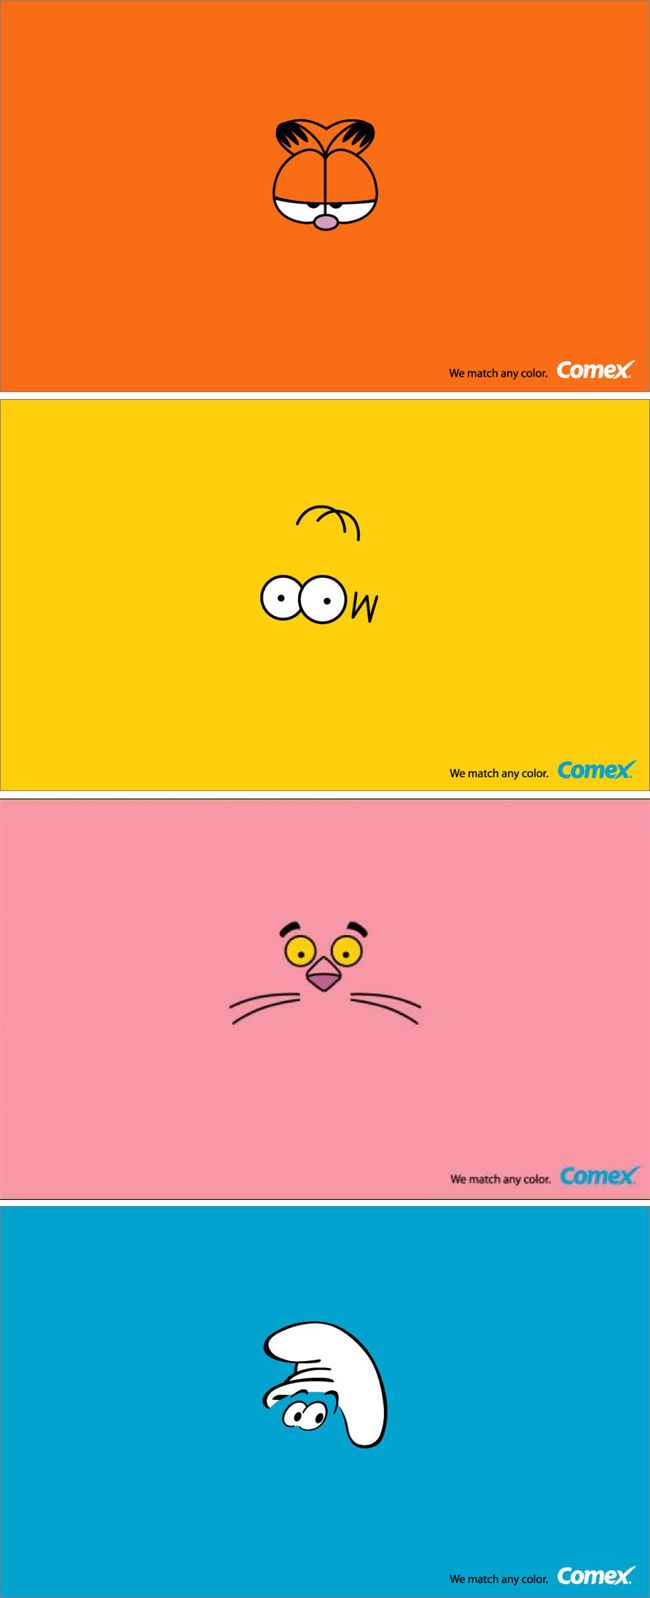 Creative-Advertising-clever-ads-for-Comex-Paint-using-iconic Creative Advertising : clever ads for Comex Paint using iconic cartoon characters and their identifying...